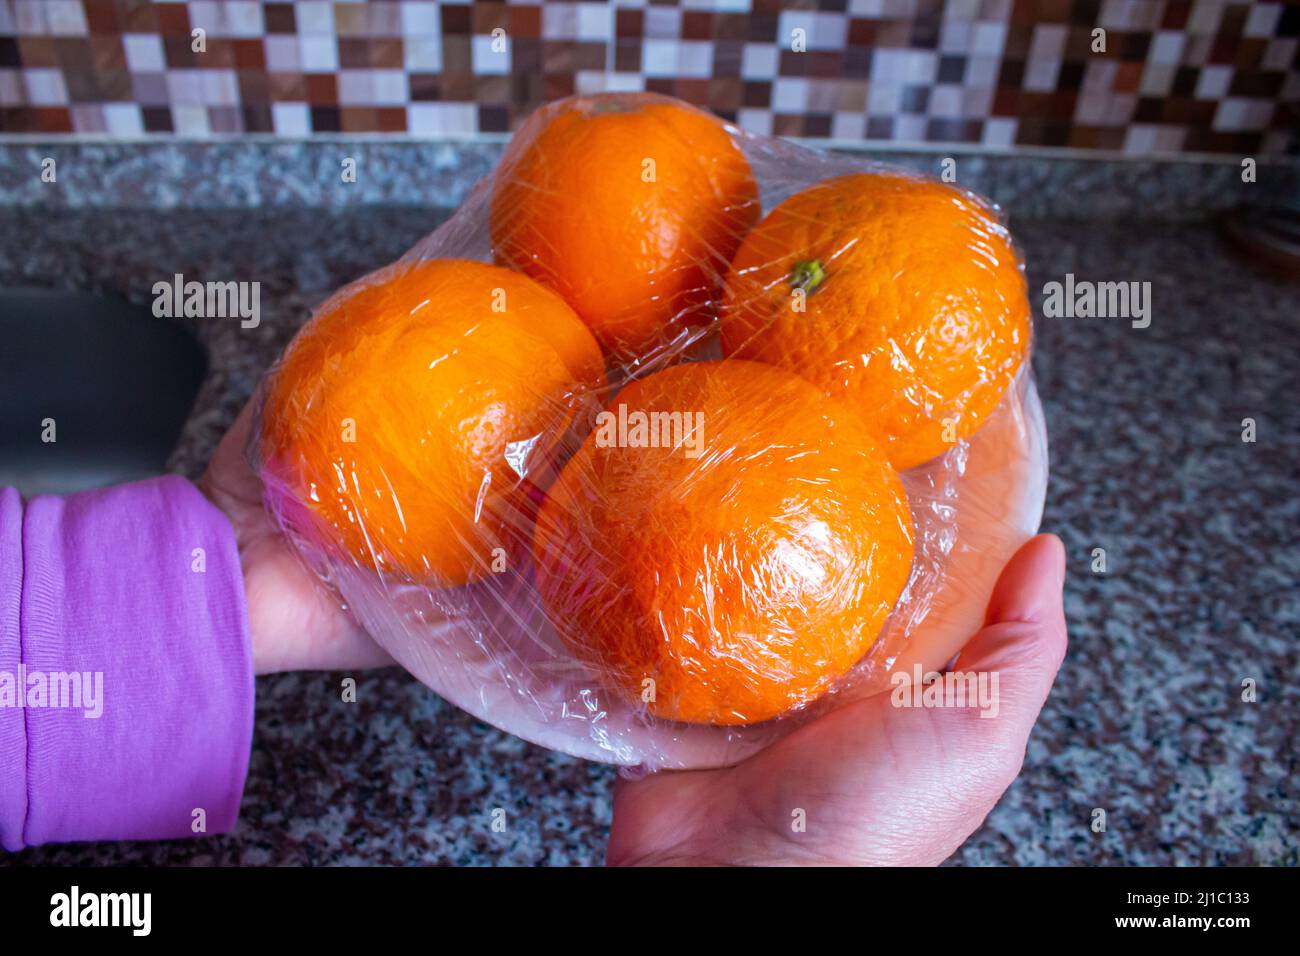 Woman is holding packaged orange fruits in hand. Using food film for fruits storage in fridge. Food storage concept. Stock Photo